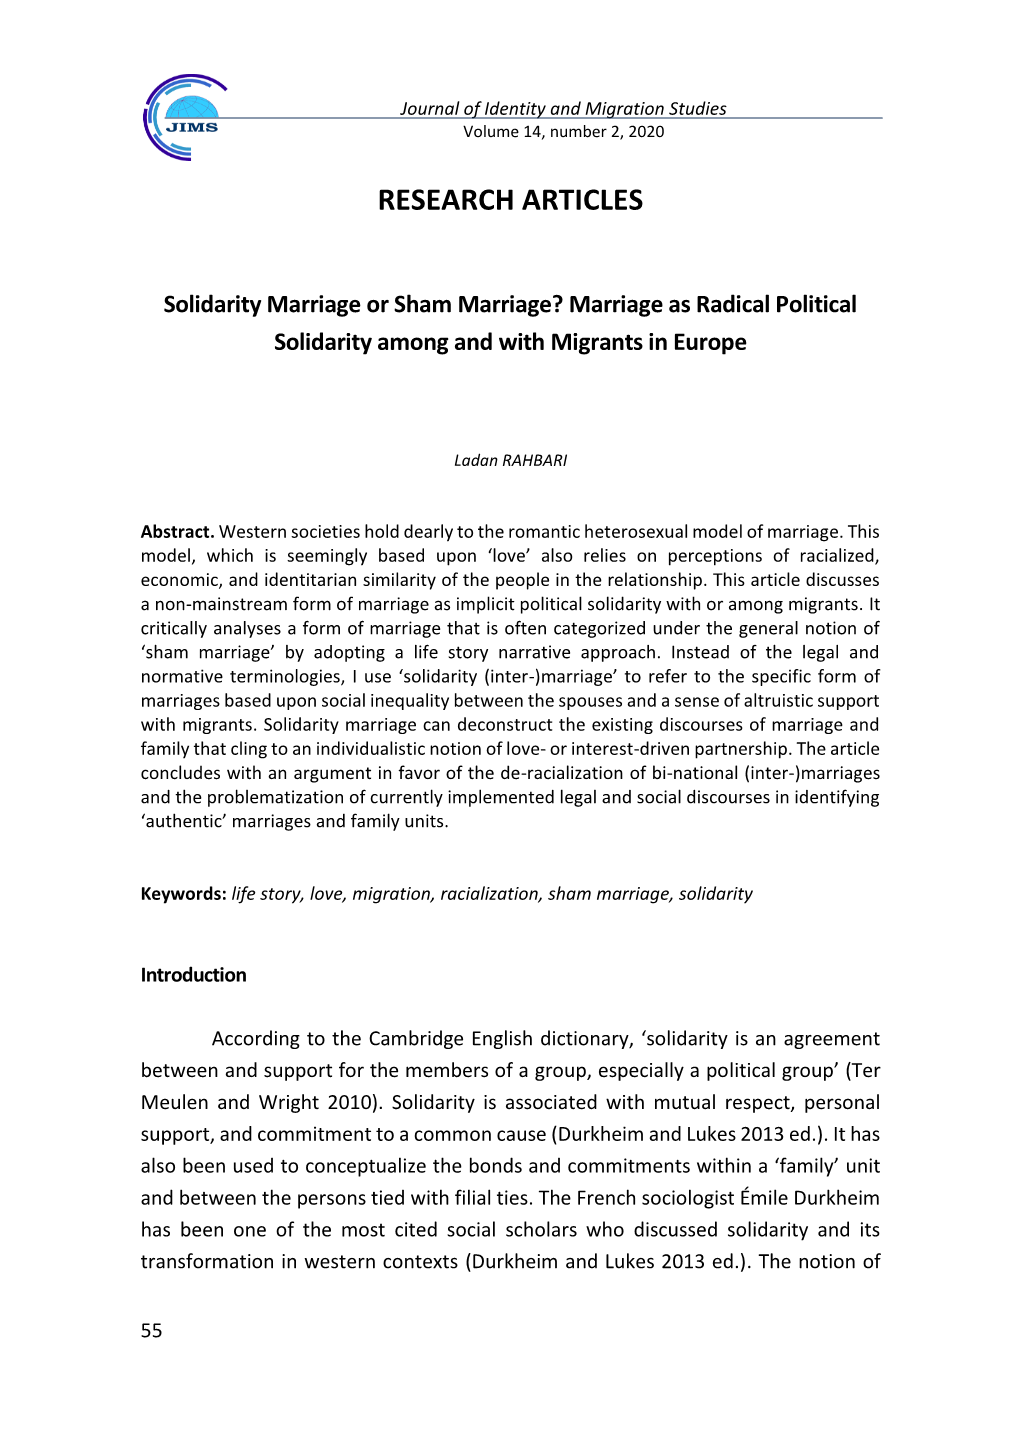 Marriage As Radical Political Solidarity Among and with Migrants in Europe